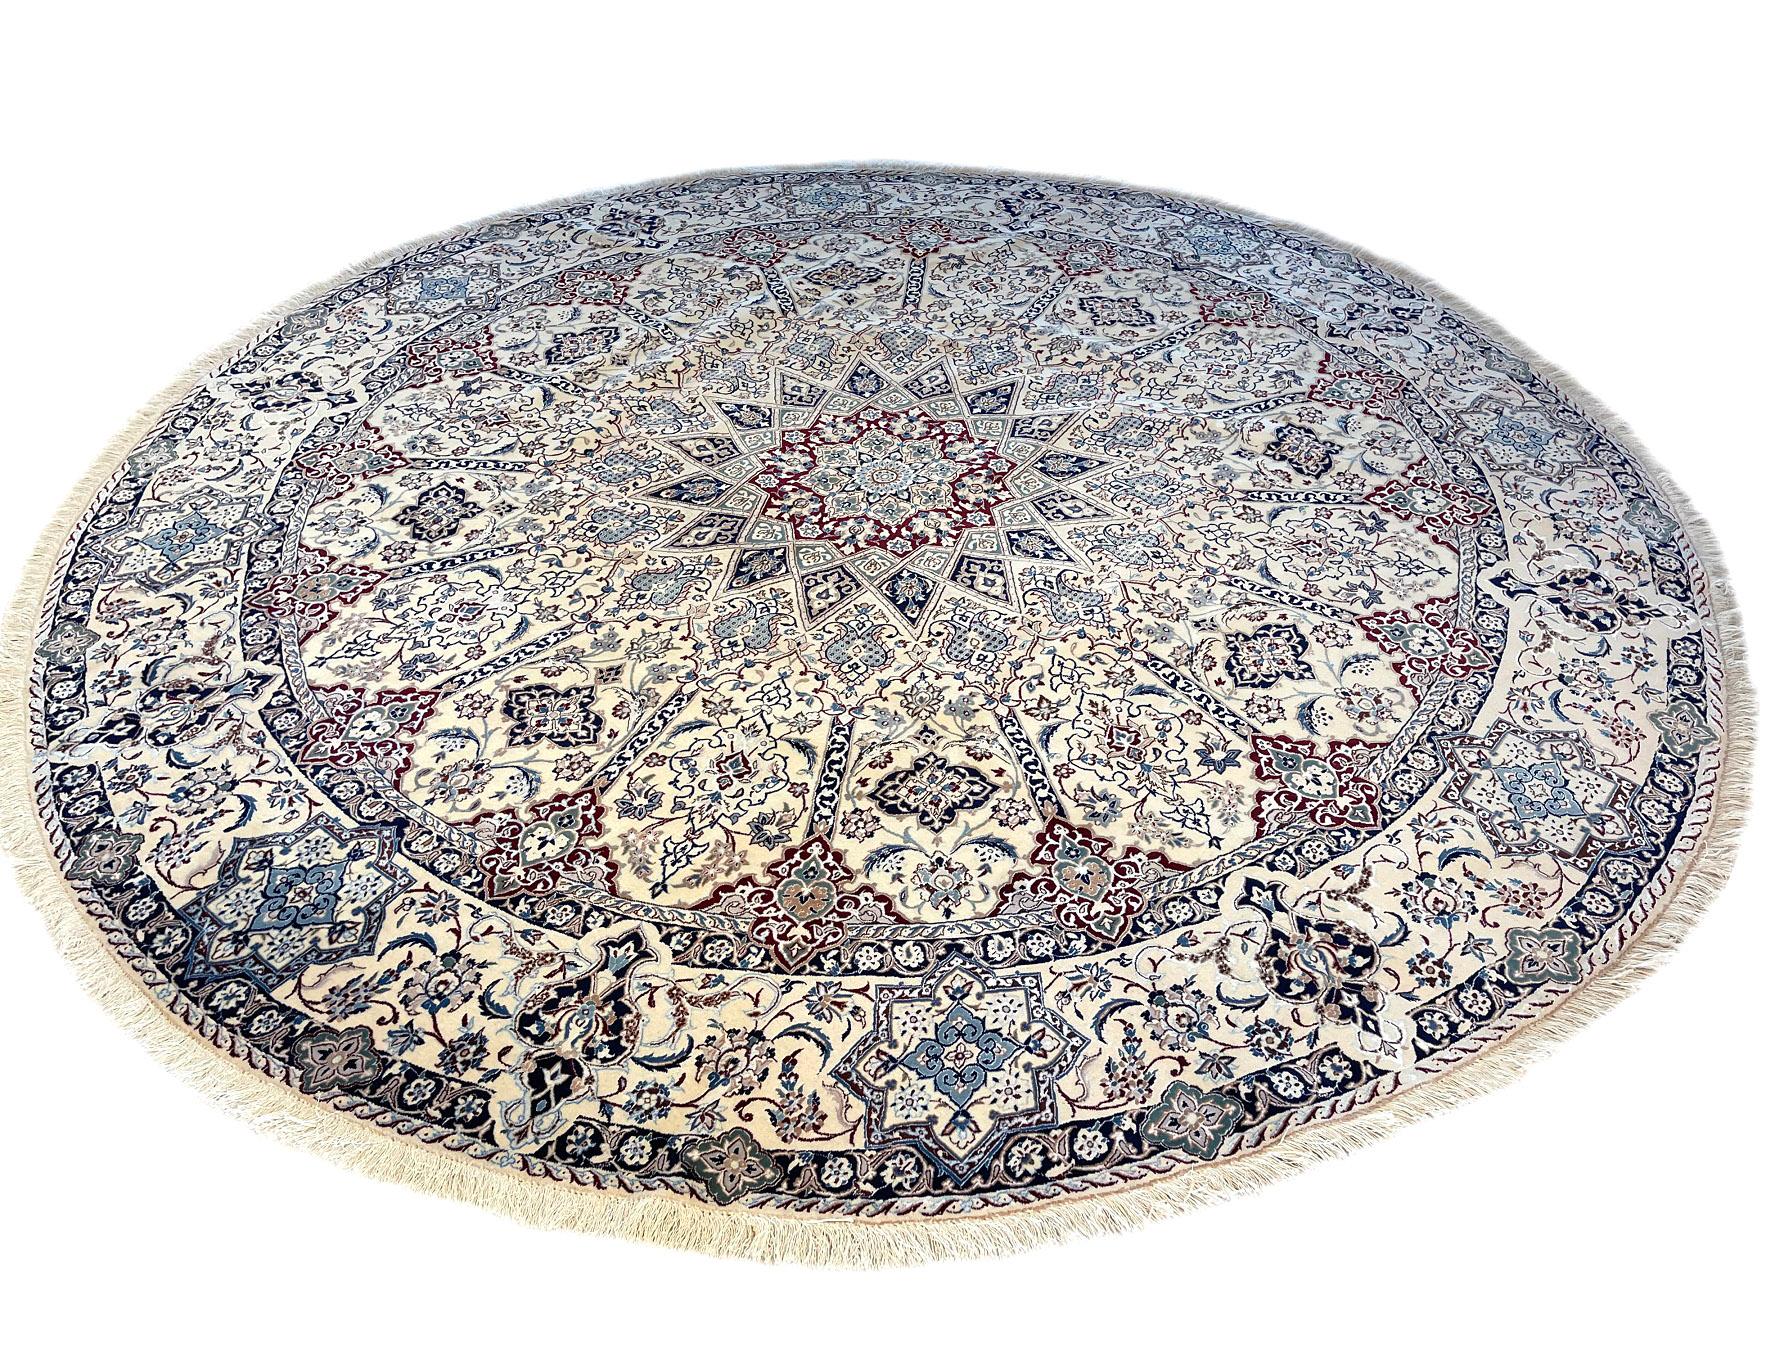 This authentic Persian round hand-made Nain 9 LAA ( rug has high quality wool and silk pile with cotton foundation. The silk highlights the detail in the design. Nain is a city in Iran that is well known for producing fine handmade rug. This rug has